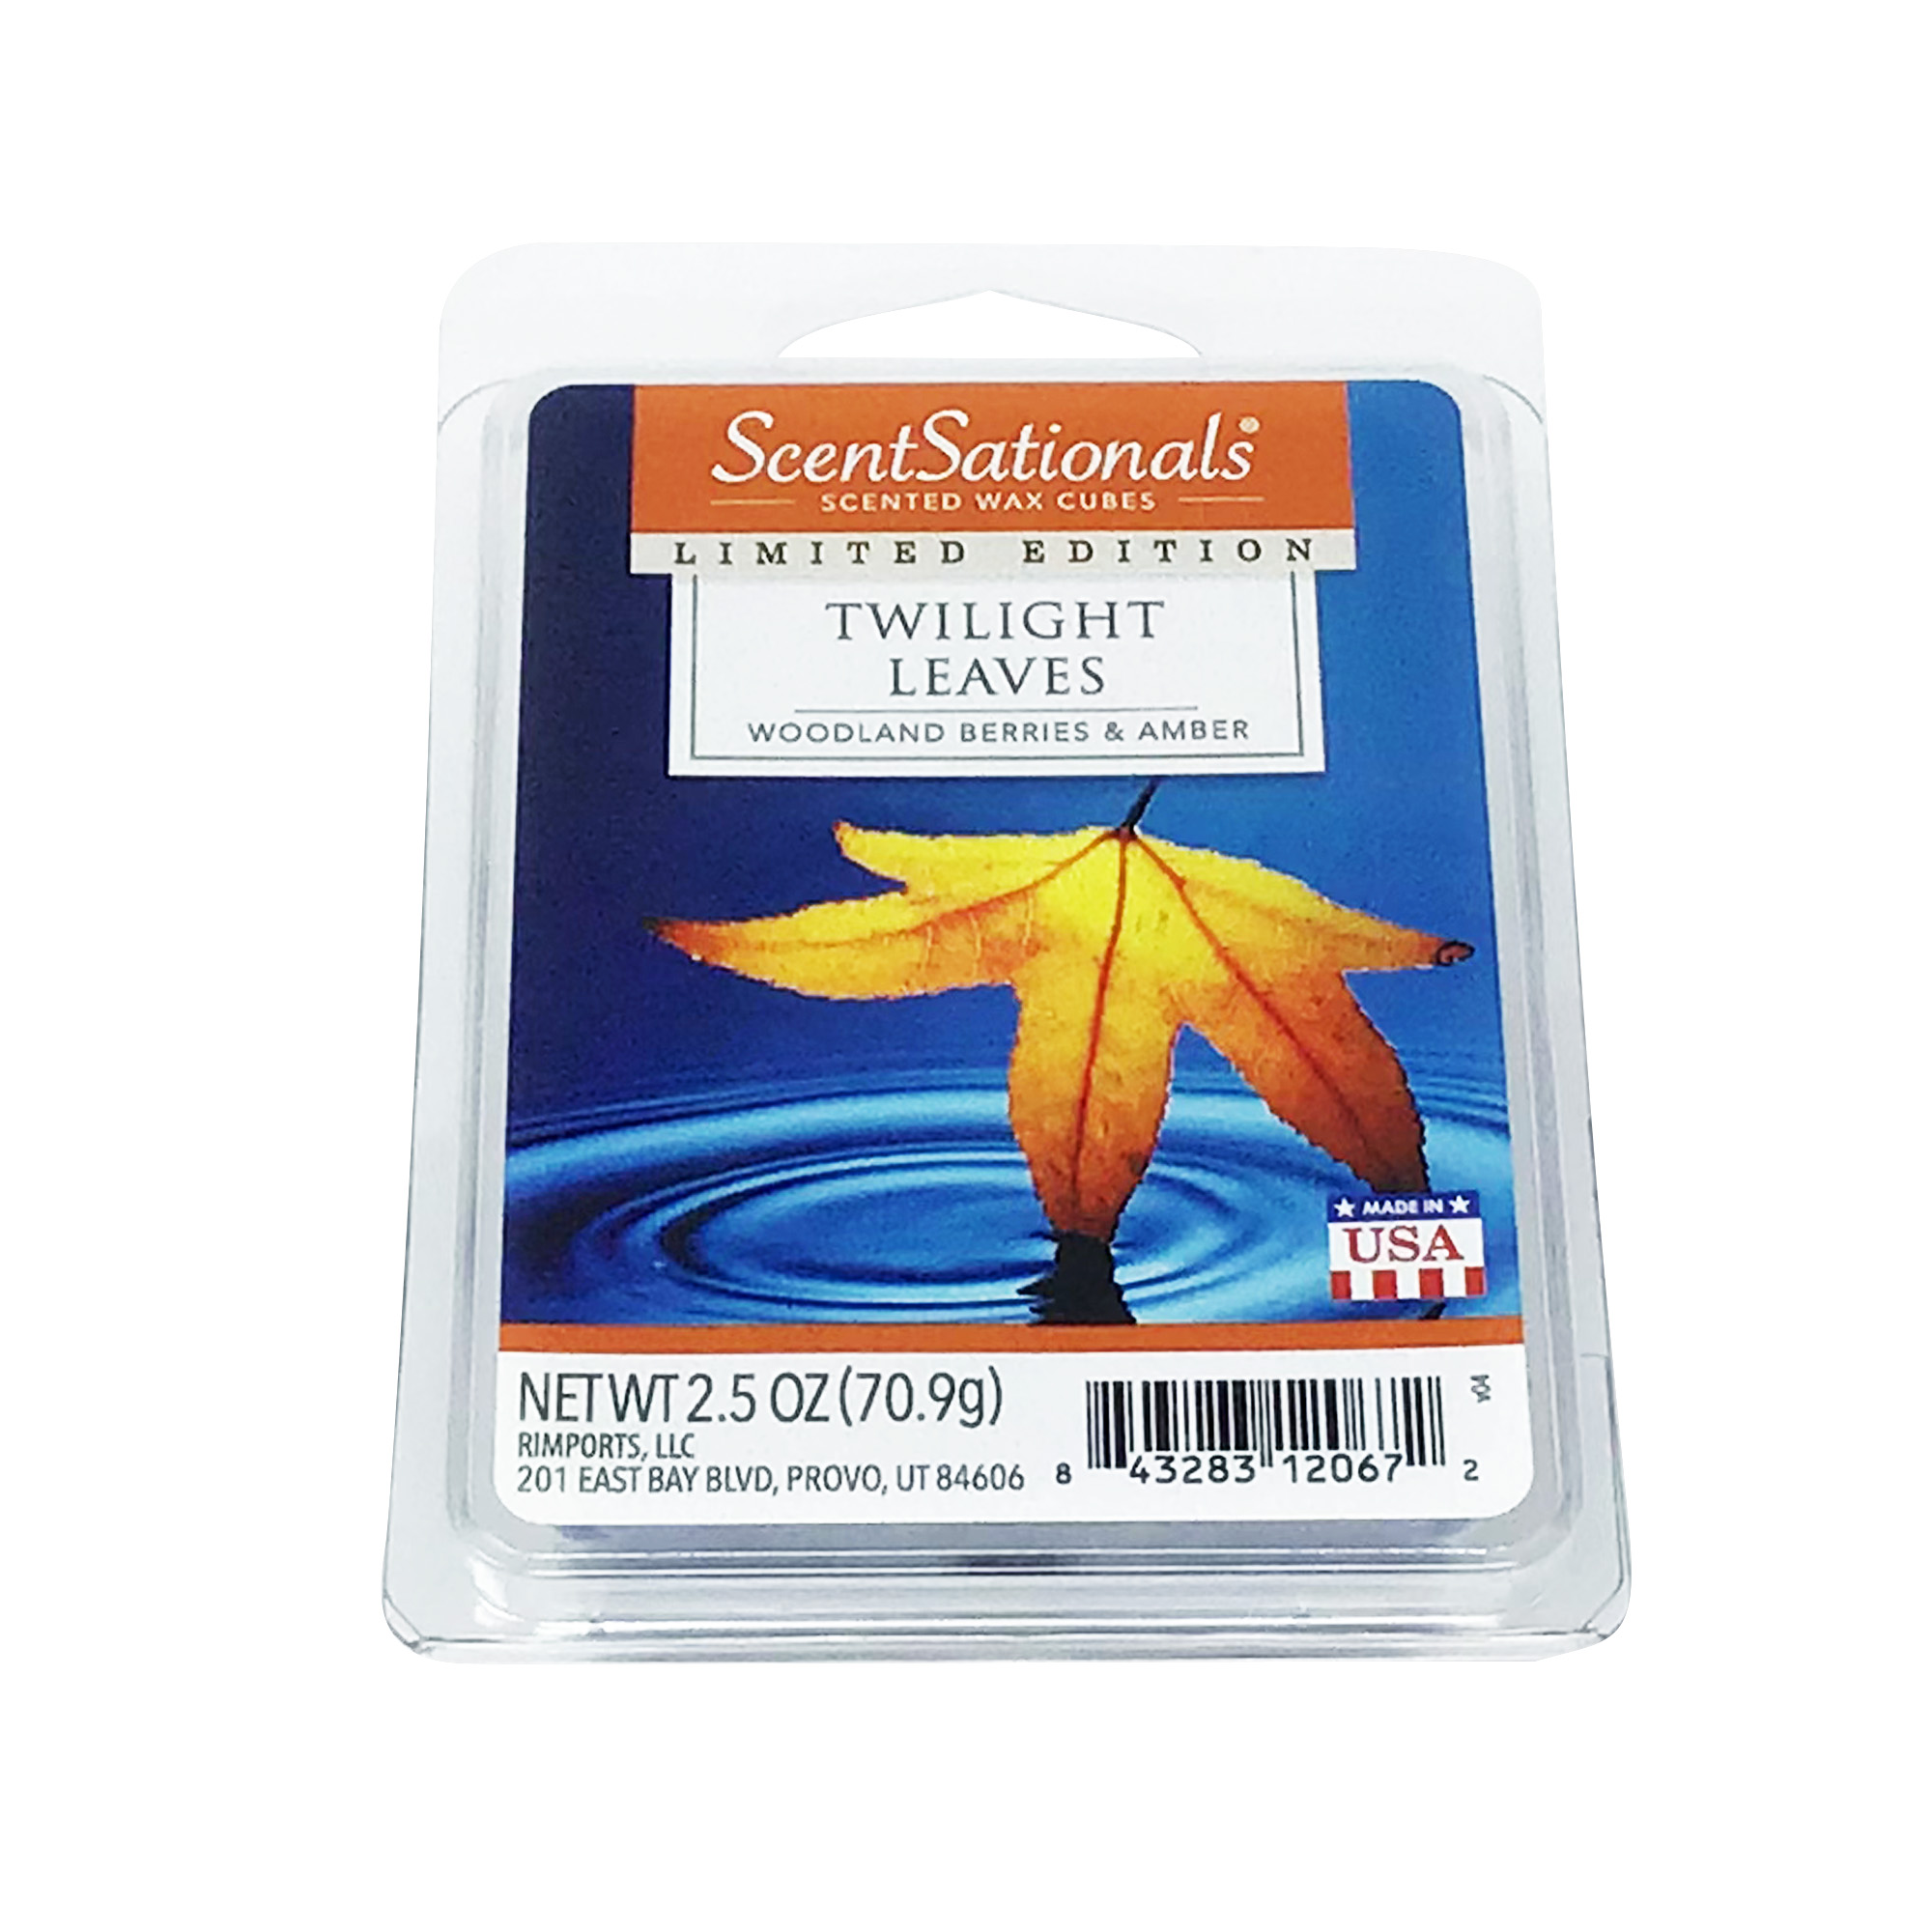 Twilight Leaves Scented Wax Melts, ScentSationals, 2.5 oz (1 Pack) 